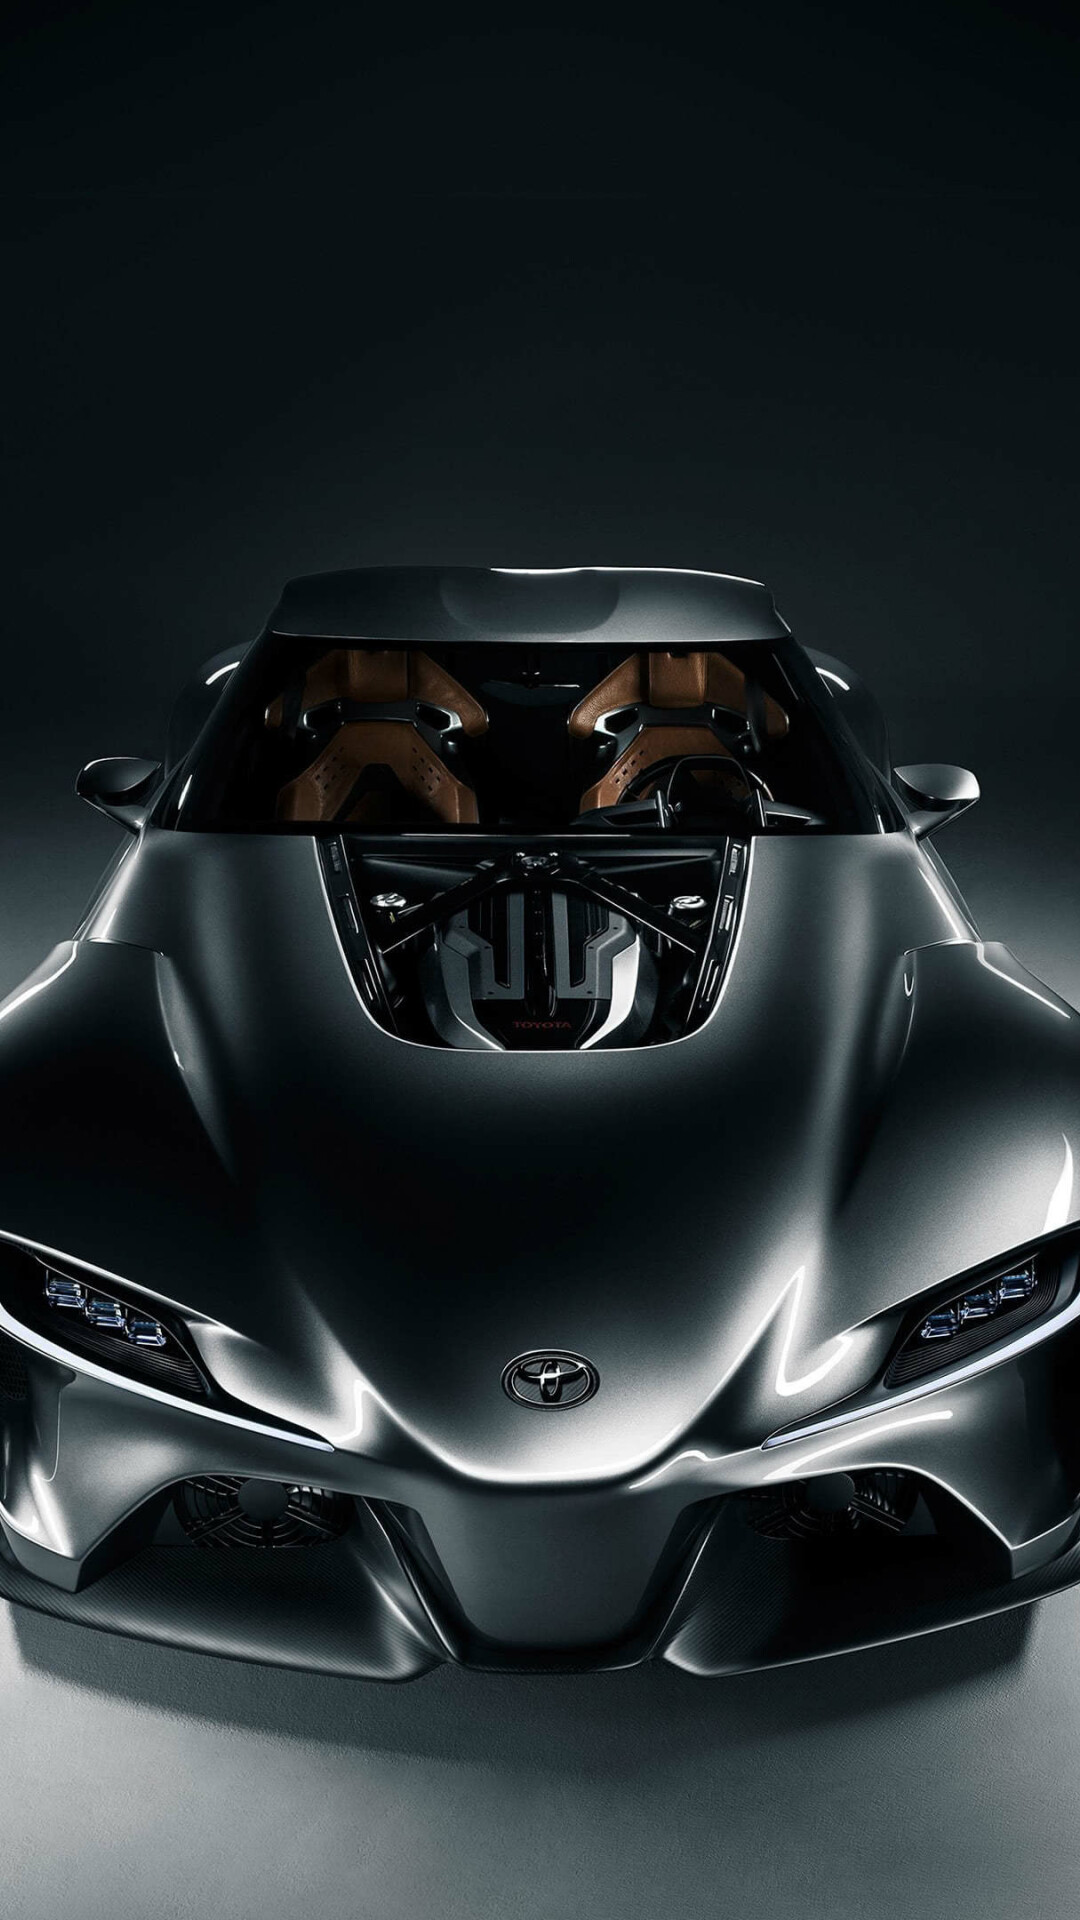 Toyota: Car brand, Founded in 1926 by Sakichi Toyoda. 1080x1920 Full HD Wallpaper.